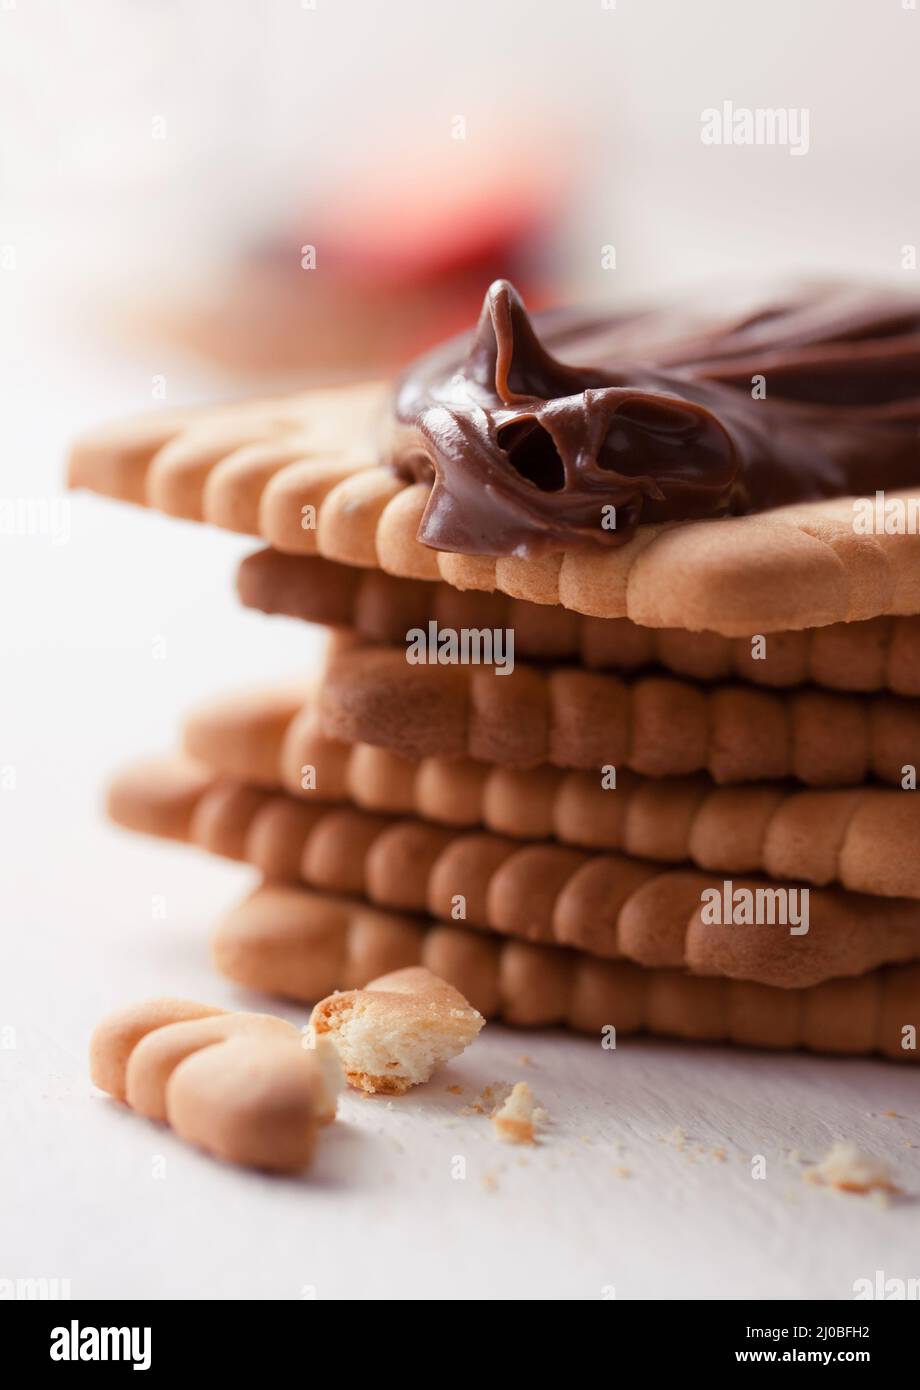 Chocolate sweet melting nougat cream on cookies on a white plate Stock Photo